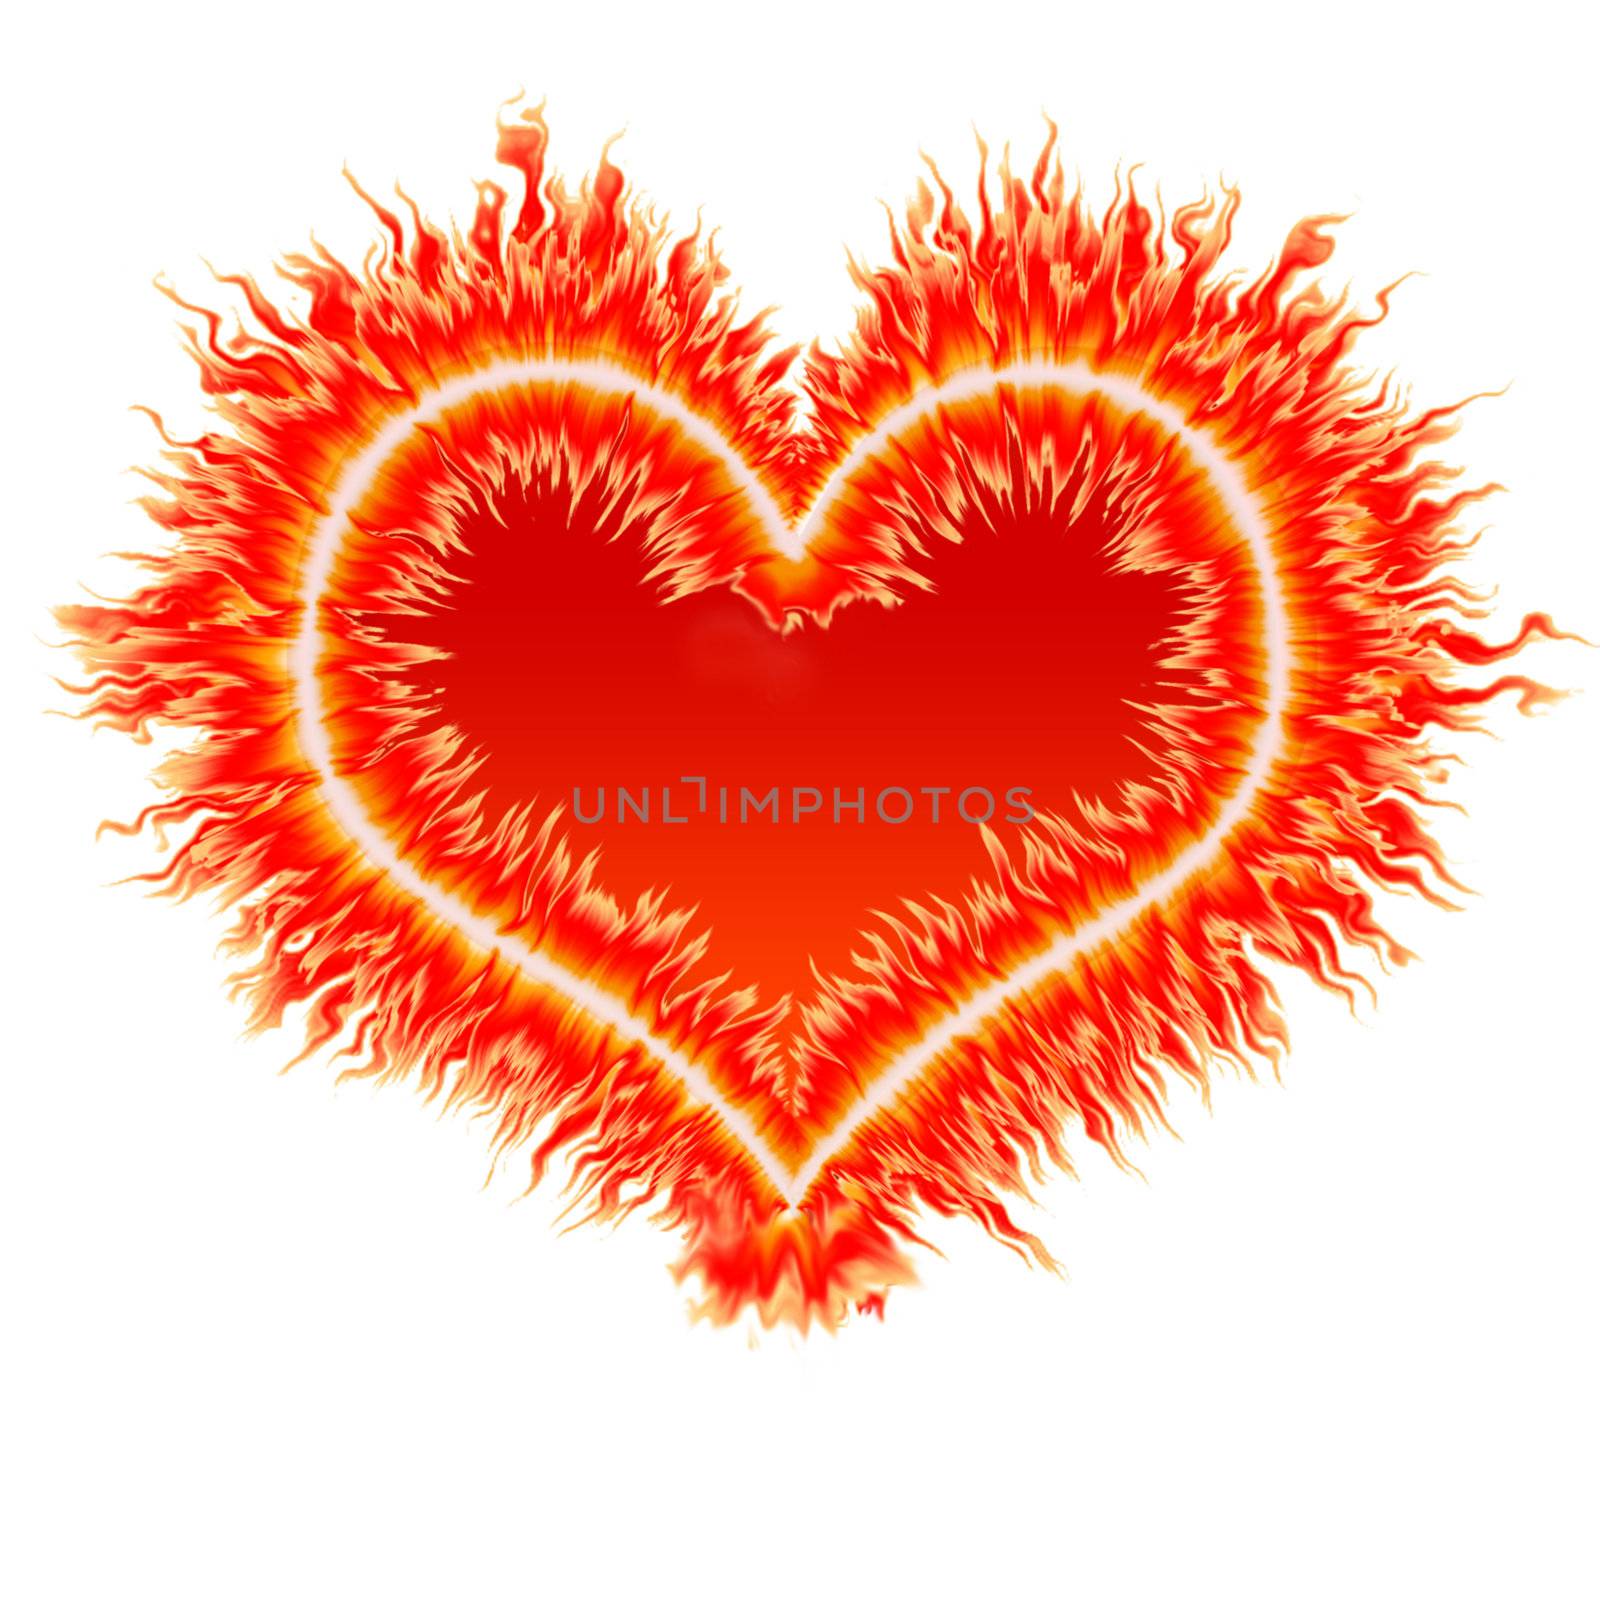 fire heart in red, orange and yellow flames